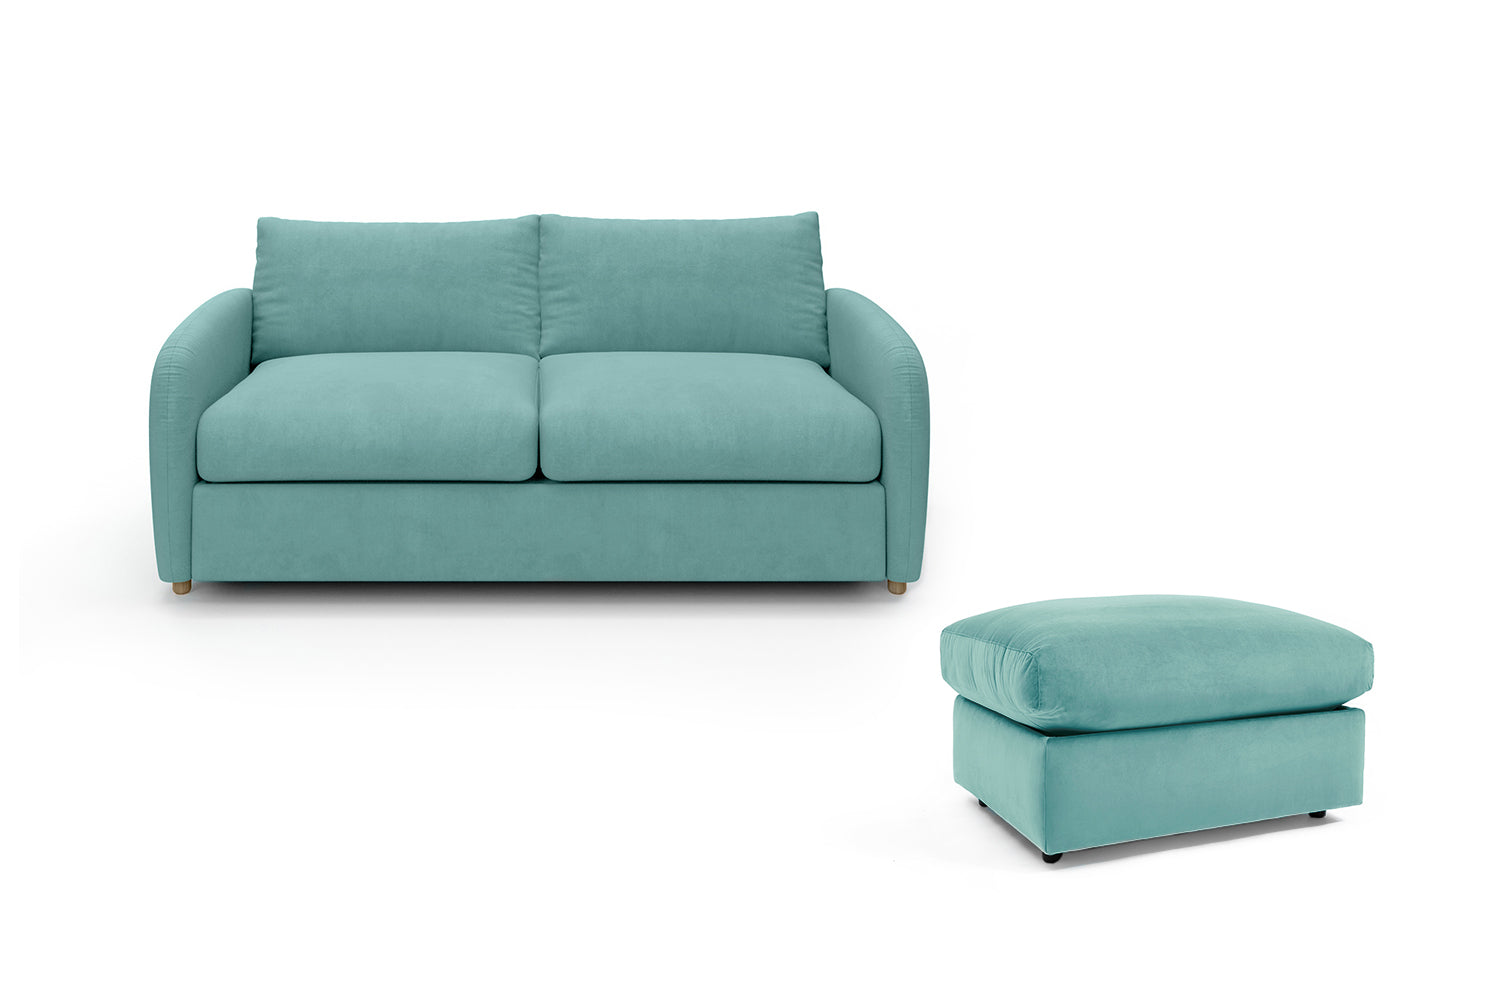 The Small Biggie - 3 Seater Sofa and Footstool Set - Soft Teal